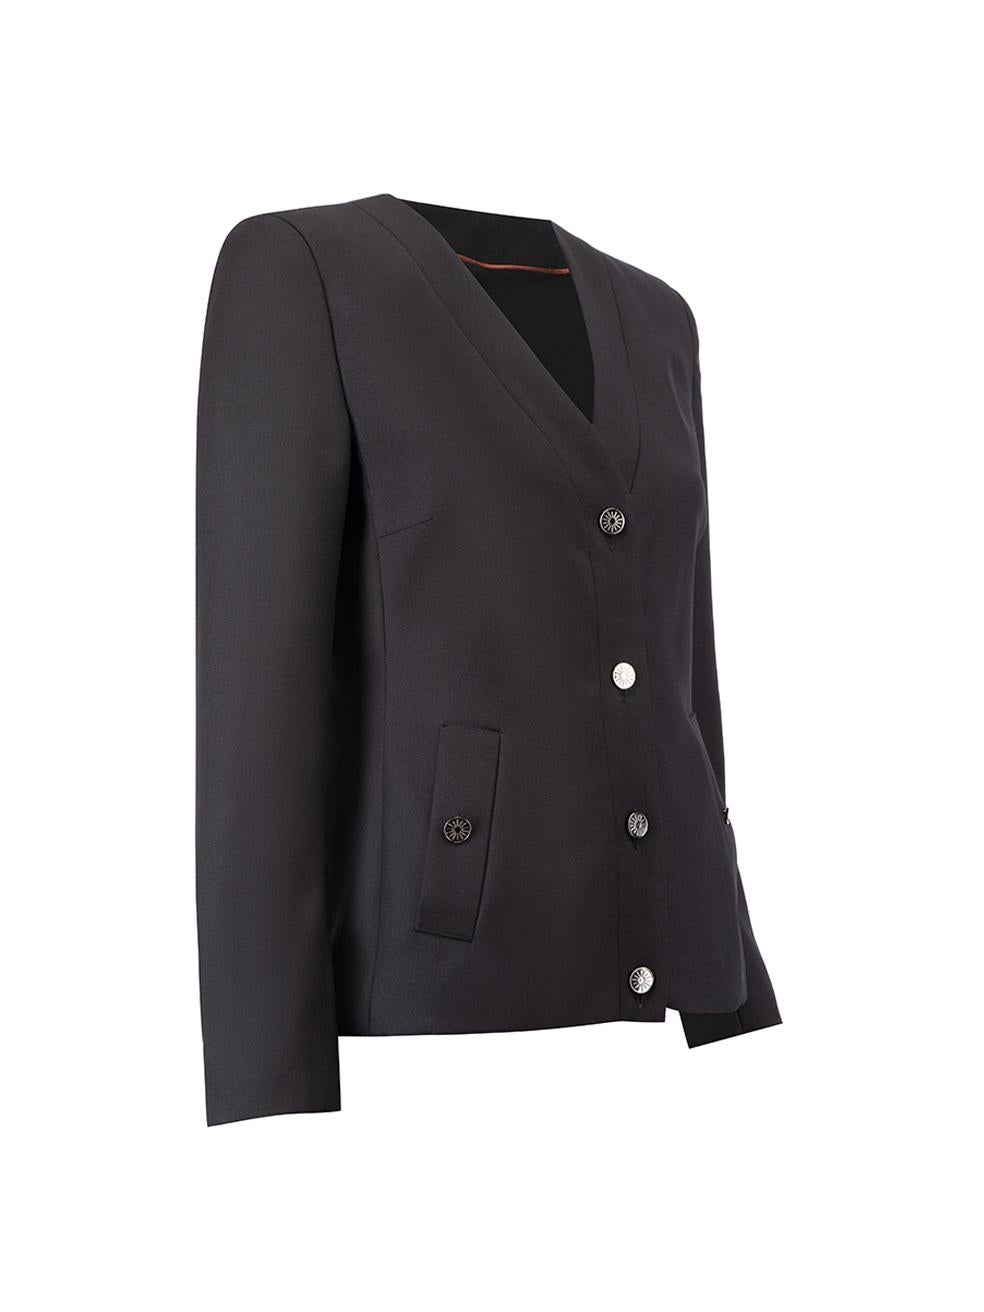 CONDITION is Very good. Hardly any visible wear to blazer is evident on this used Sanne designer sample item. Please note that this item does not have brand label.
 
 Details
  Designer sample item
 Black
 Wool
 Single breasted blazer
 Buttoned